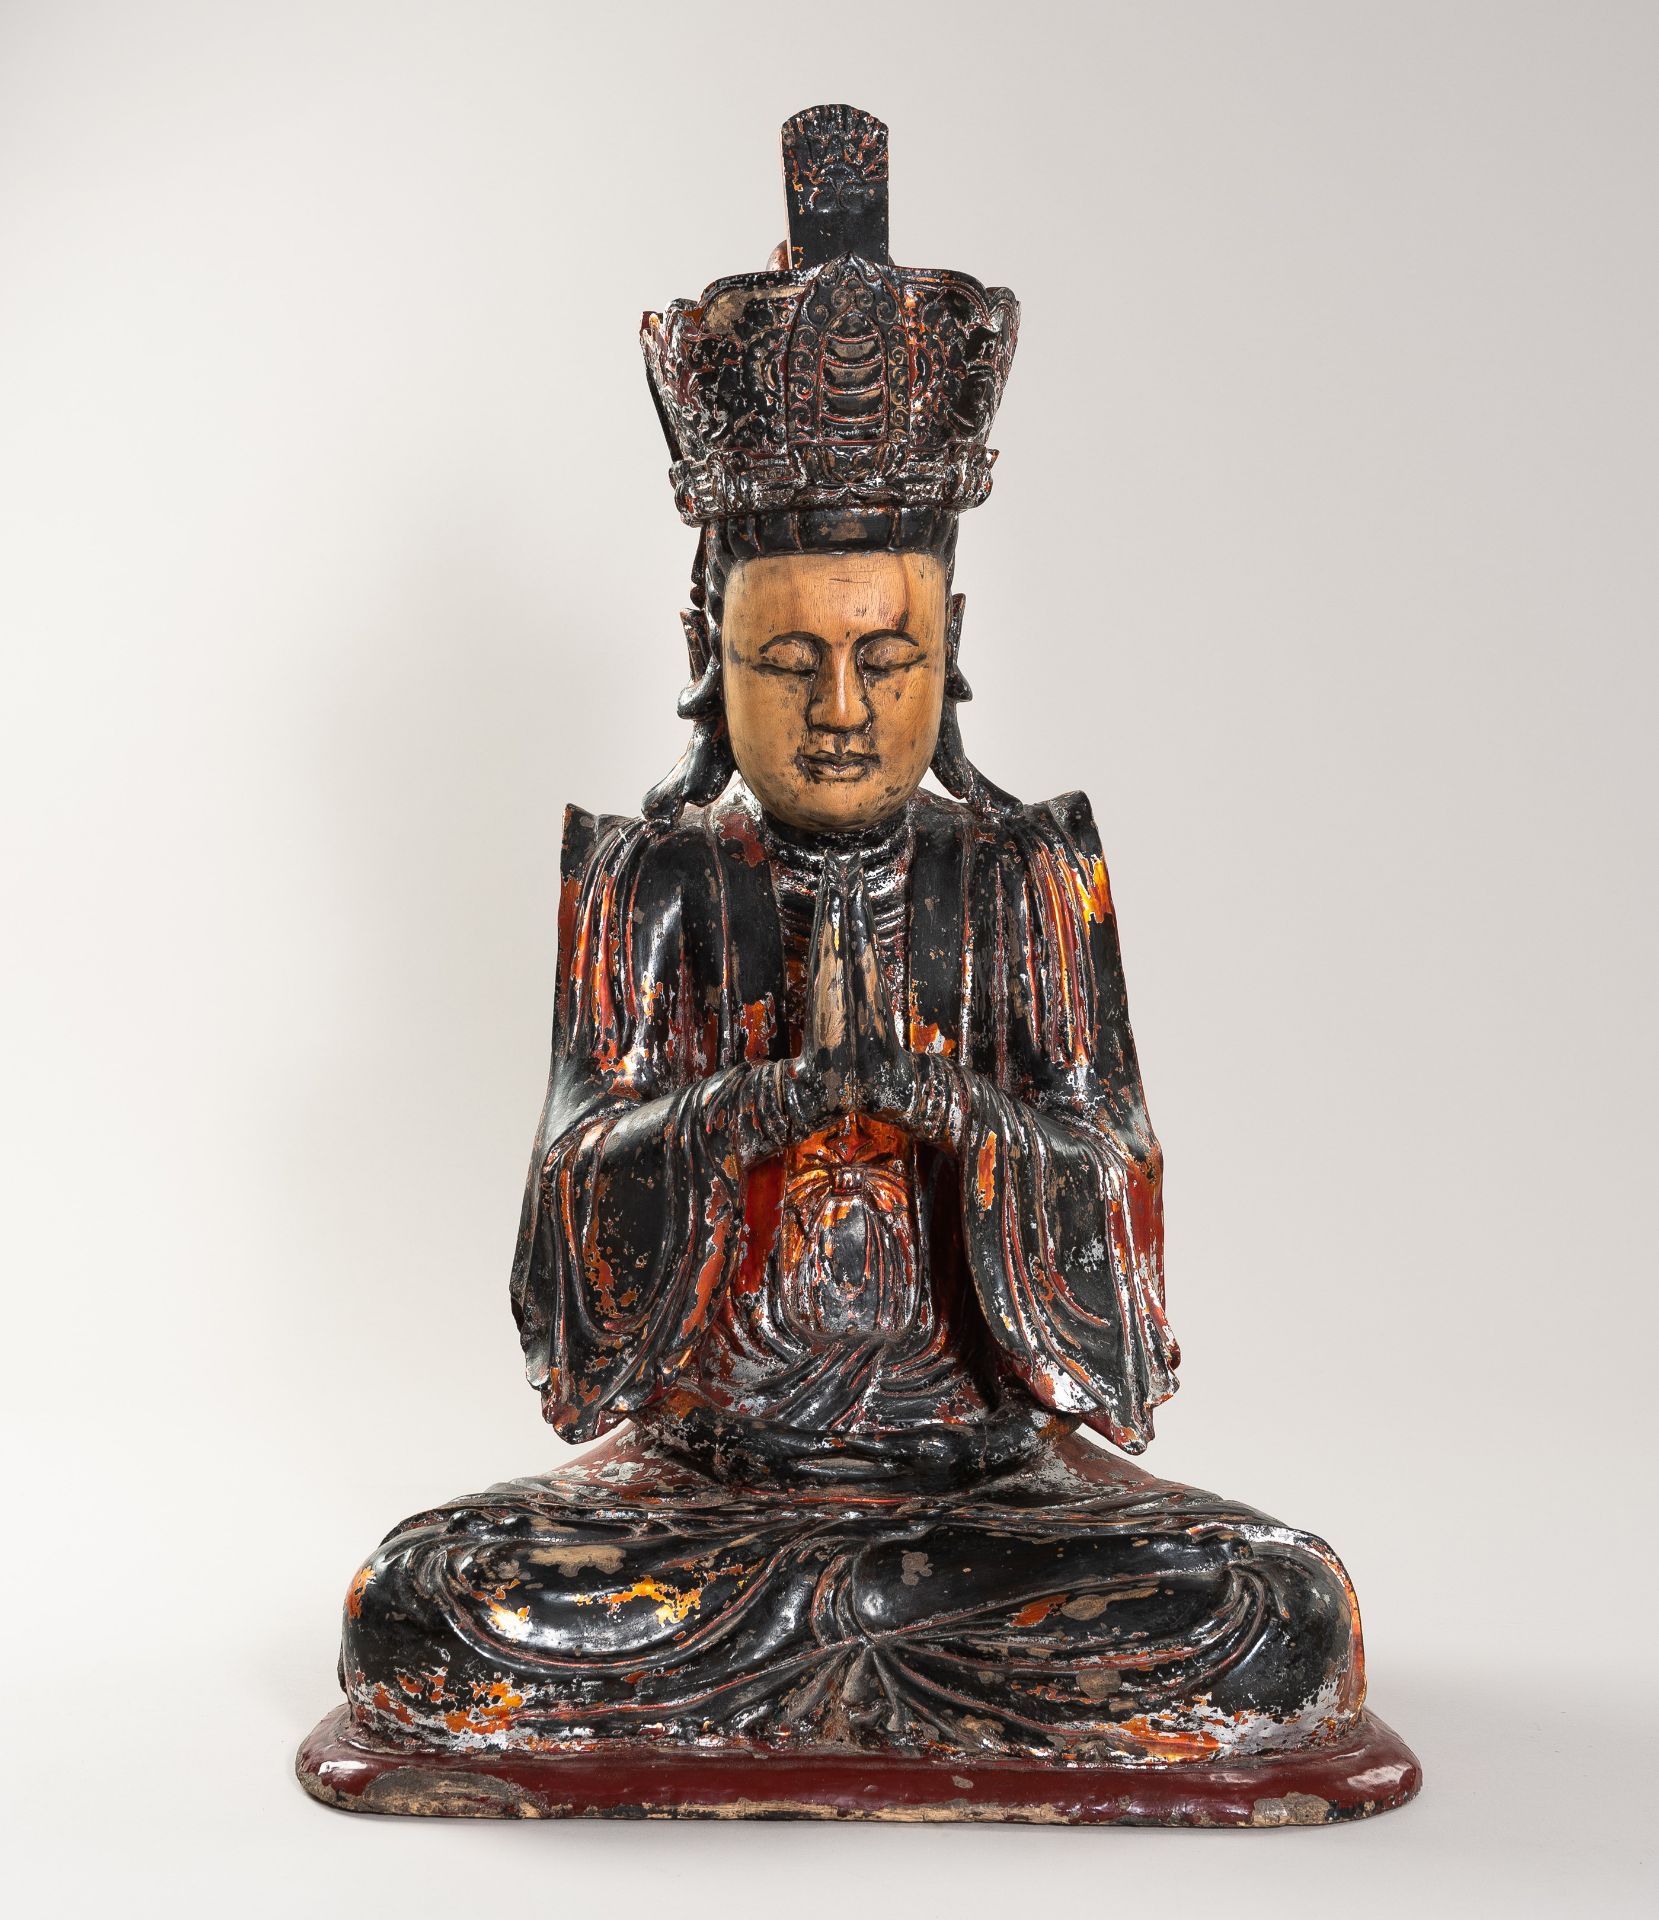 A VERY LARGE VIETNAMESE LACQUERED WOOD STATUE OF QUAN AM